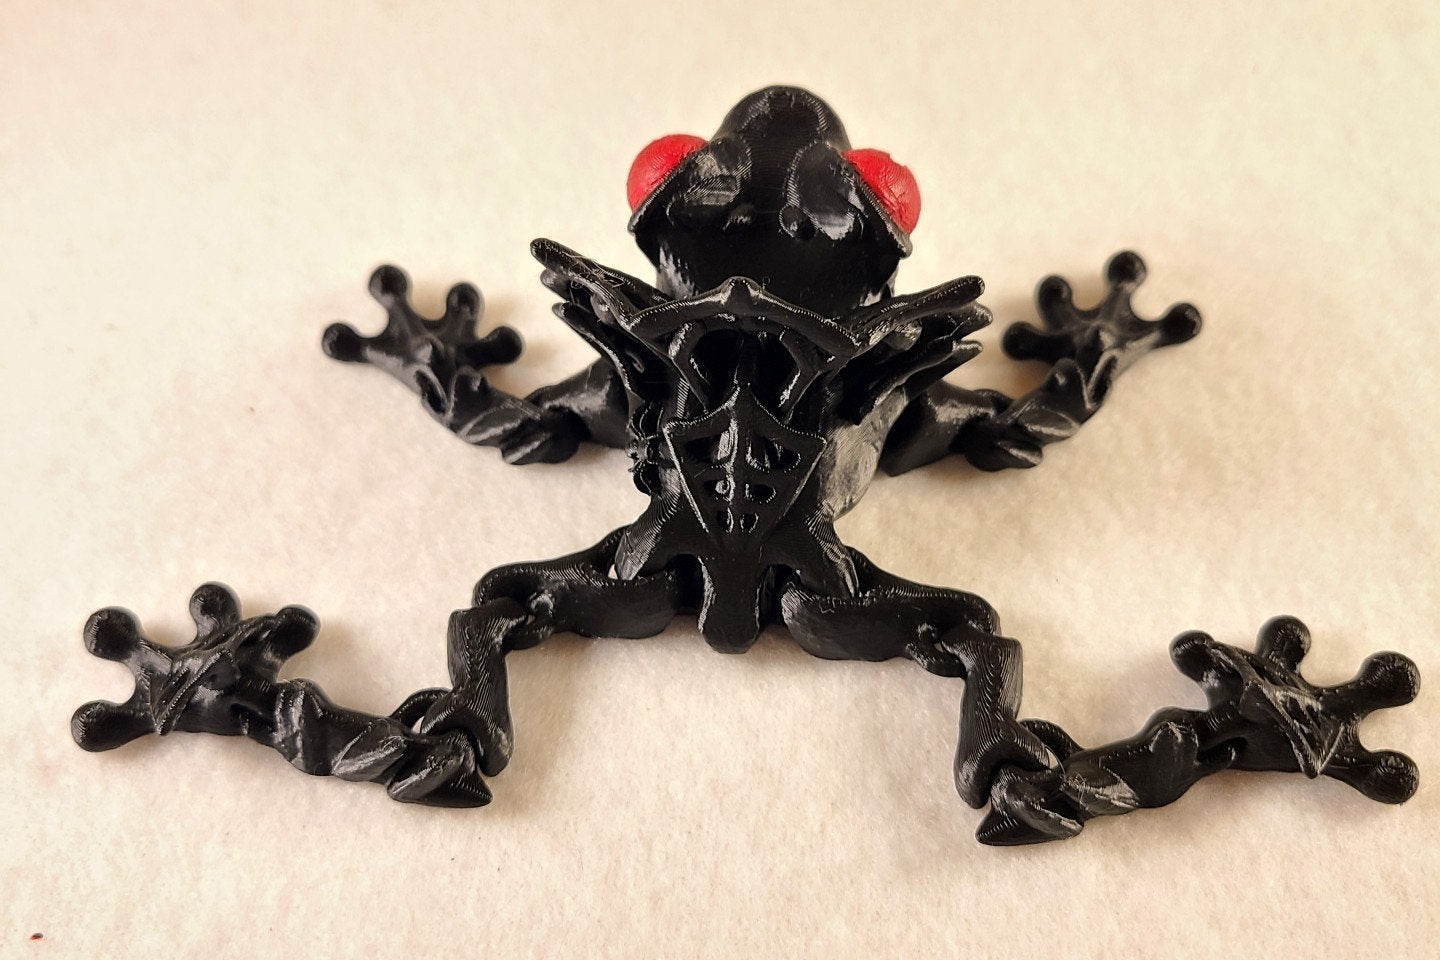 Count Frogula - 3D printed & Articulated Frog - Spider / Halloween Edition - Multicolor and free US shipping!